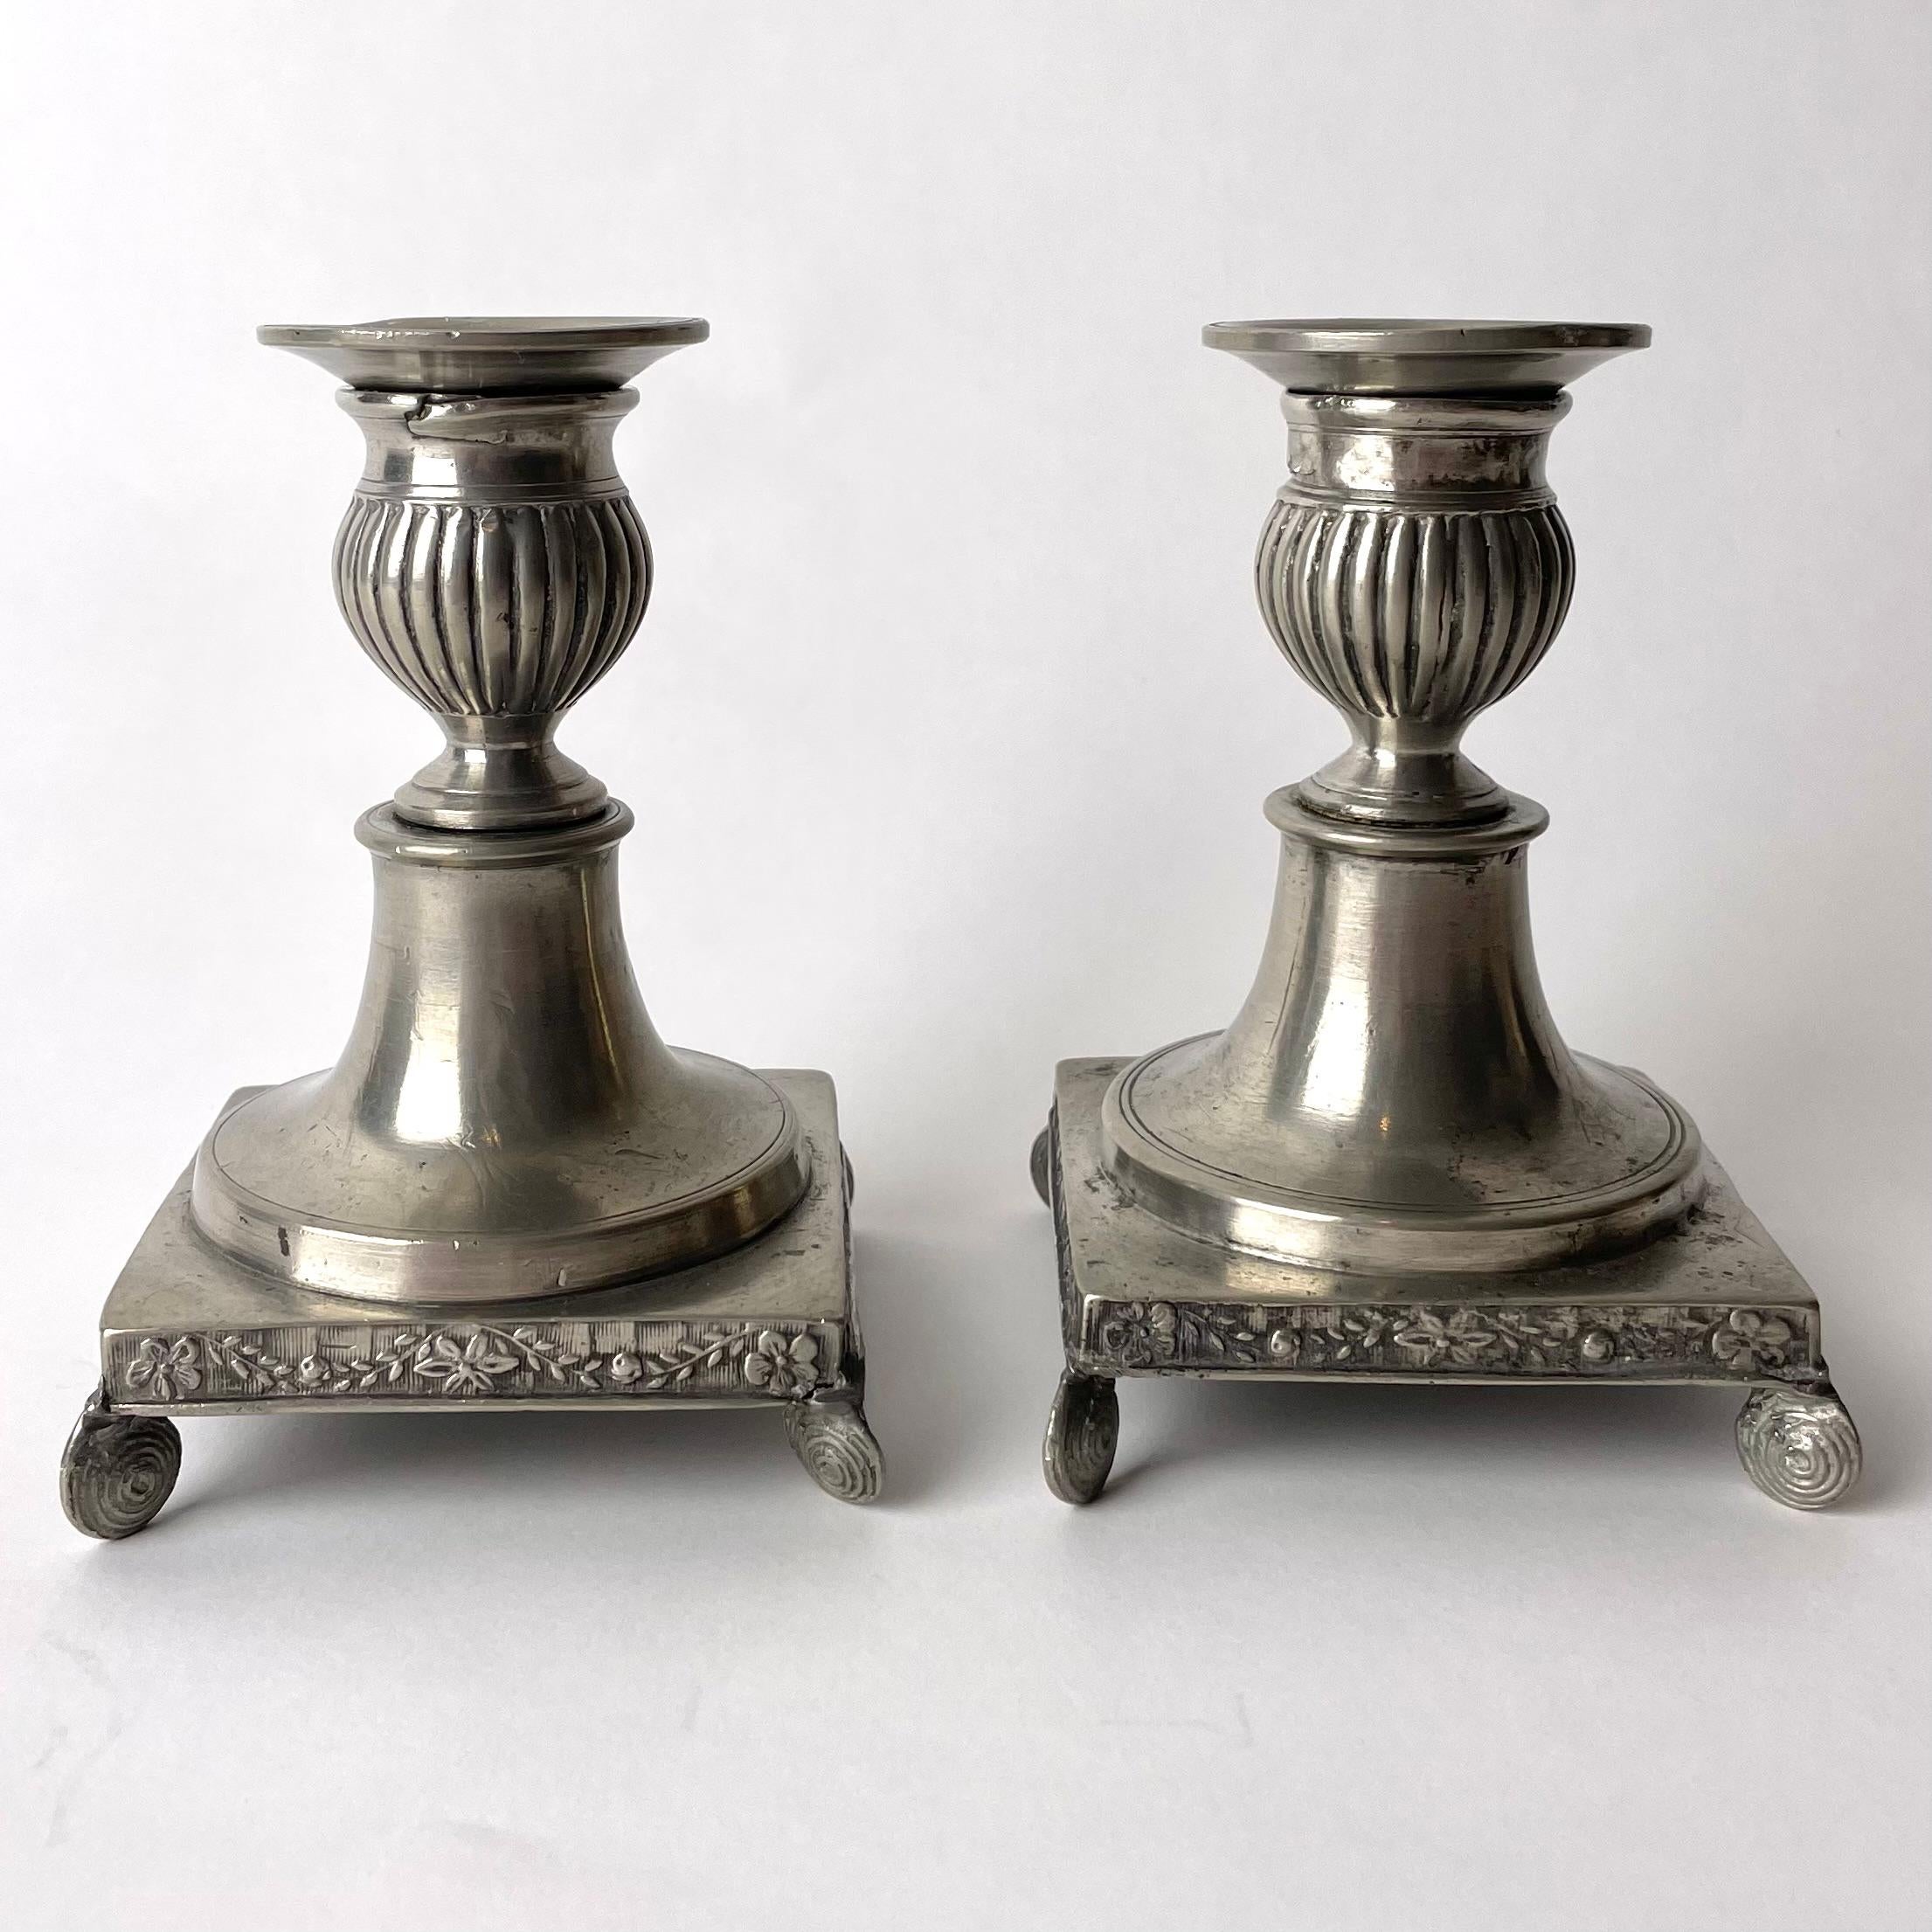 Swedish Pair of Gustavian Pewter Candlesticks from the late 18th or early 19th Century For Sale